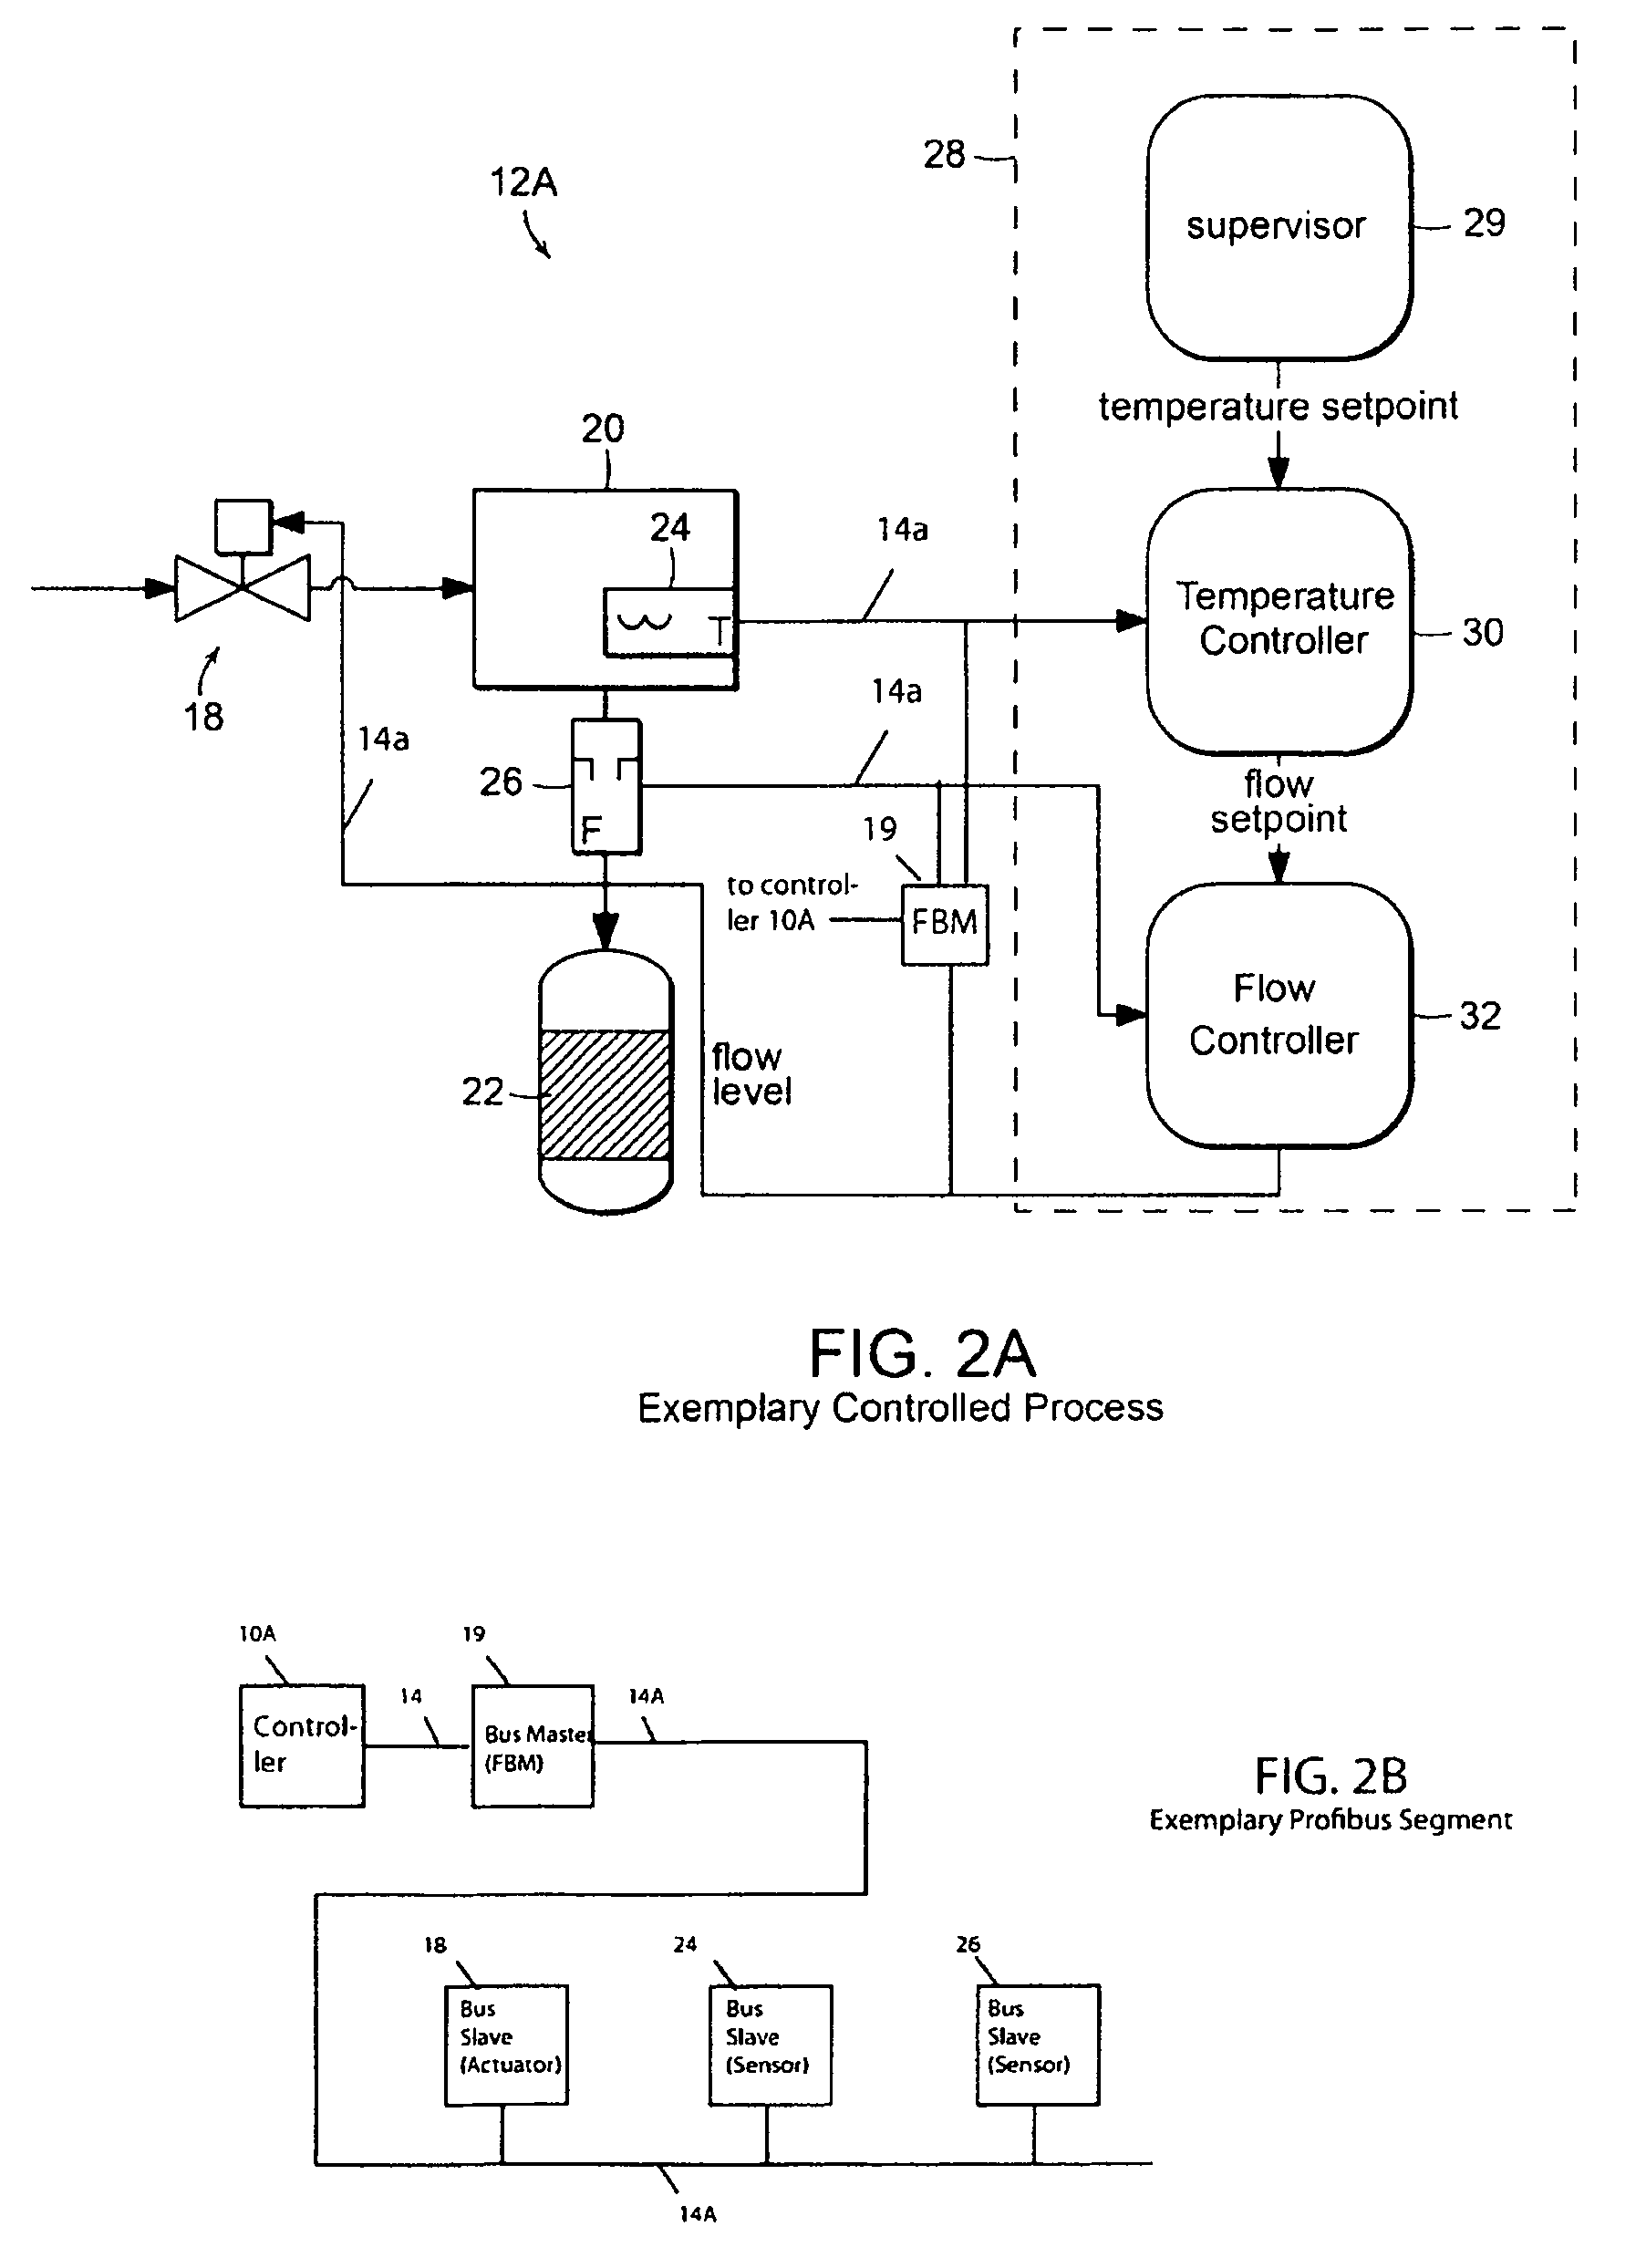 Methods and apparatus for control configuration with control objects that are fieldbus protocol-aware